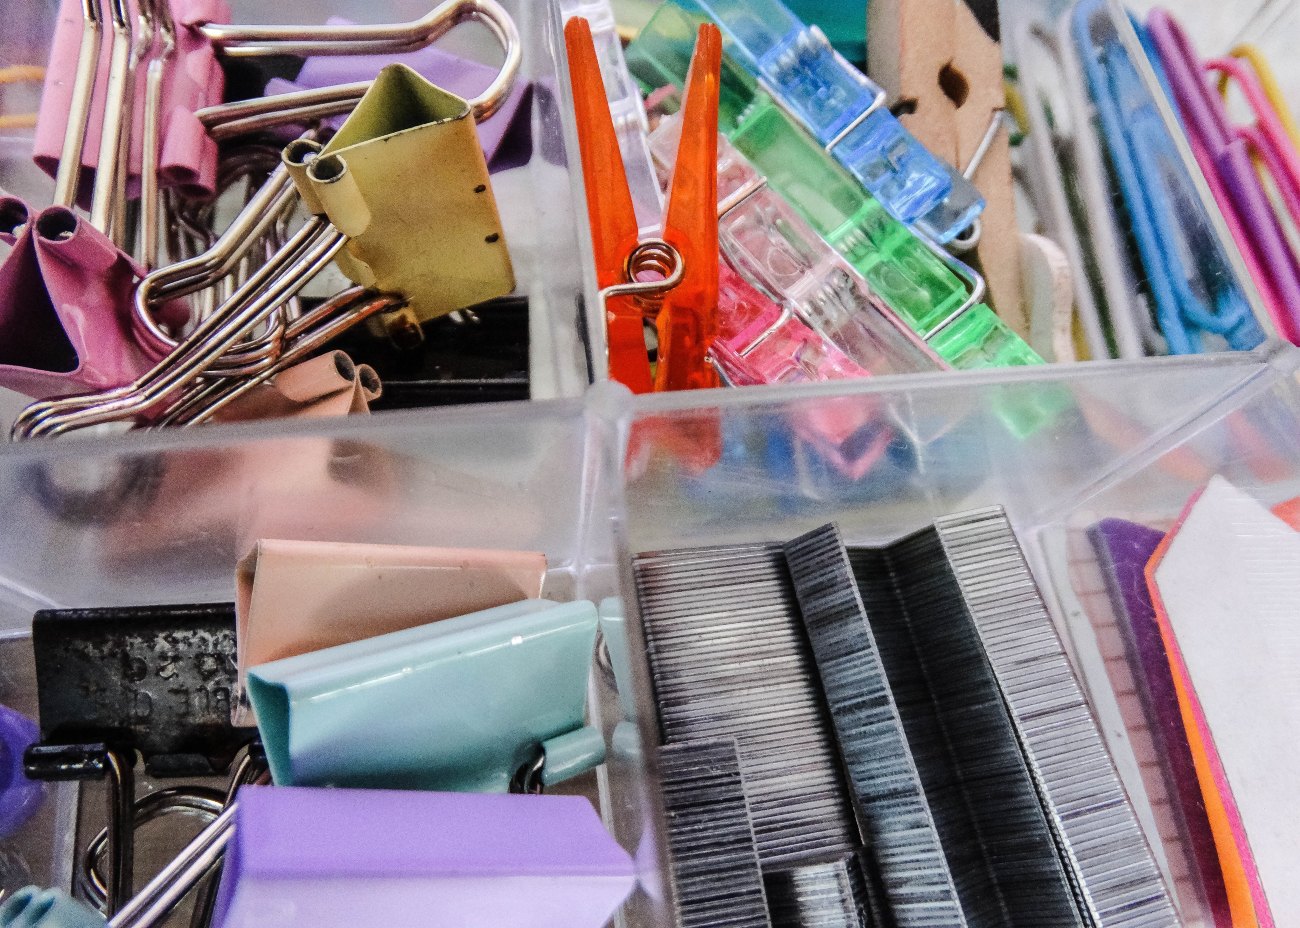 How to organize your junk drawer for good